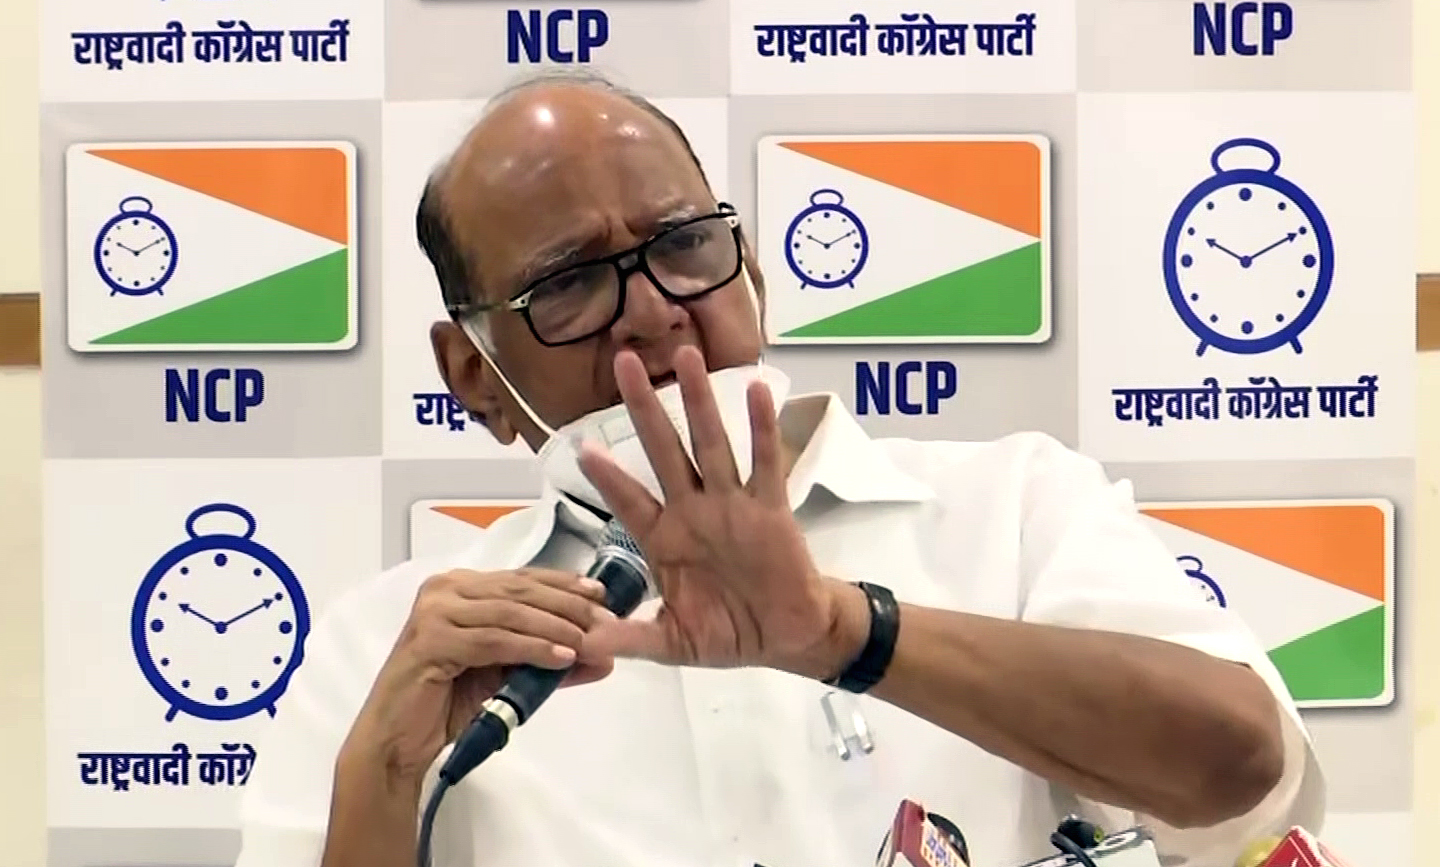 NCP Chief Sharad Pawar addressing a press conference